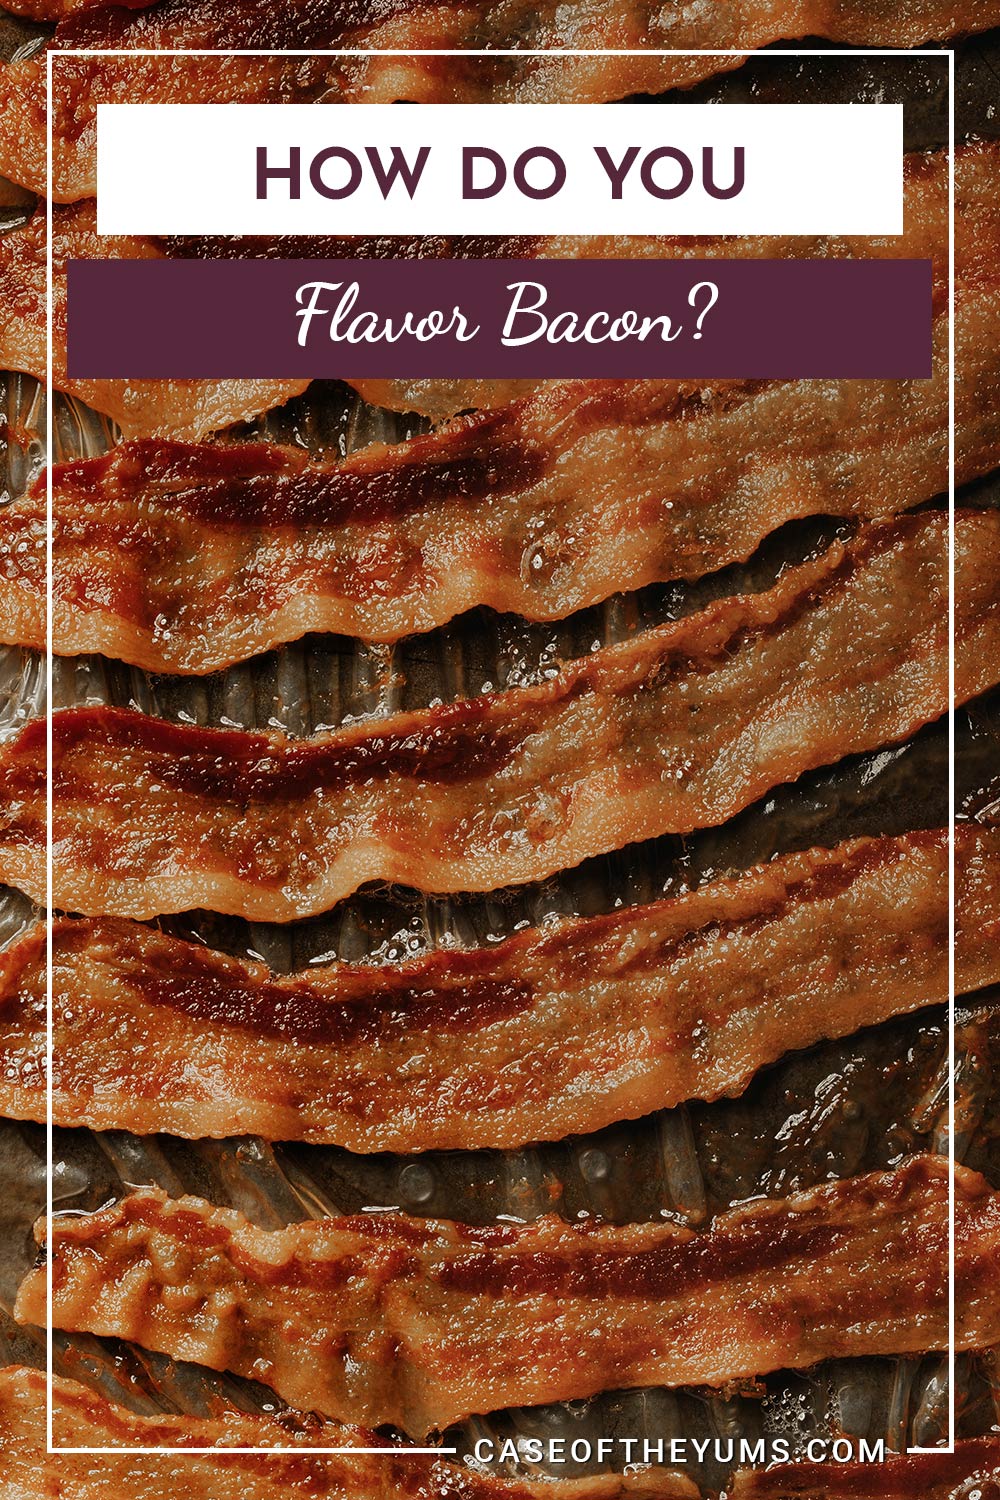 Brown baked bacon - How Do You Flavor it?